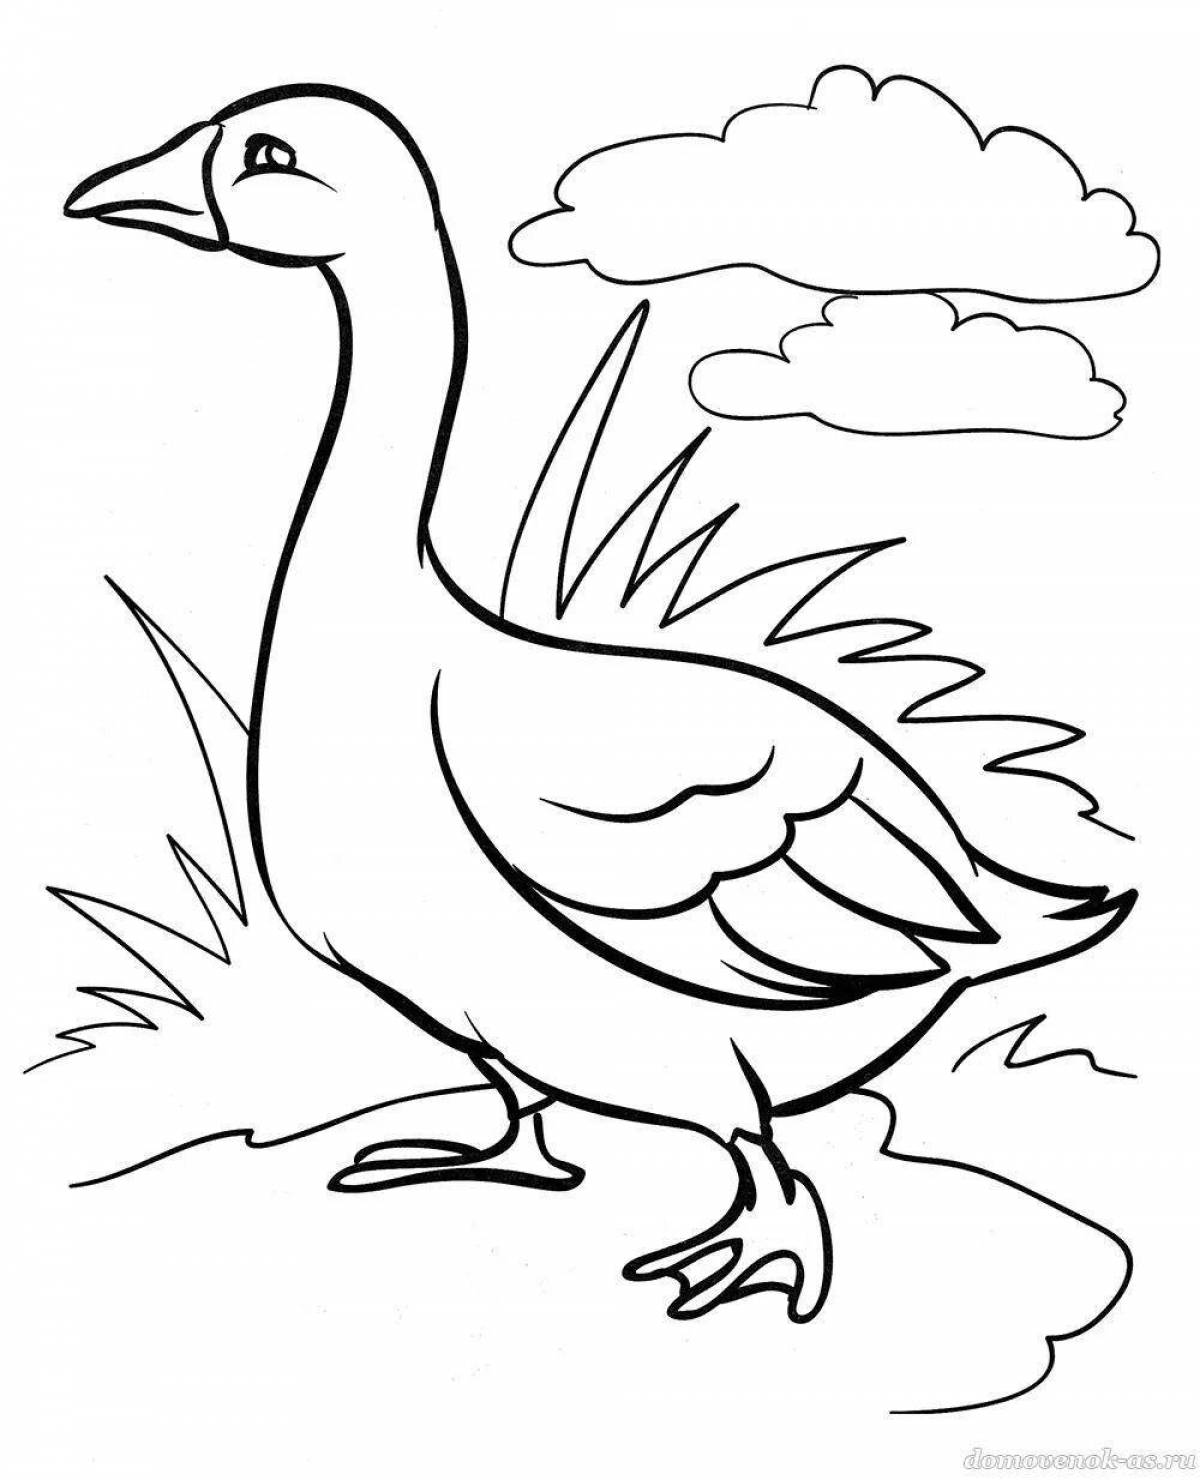 Stimulating bird coloring page for kids